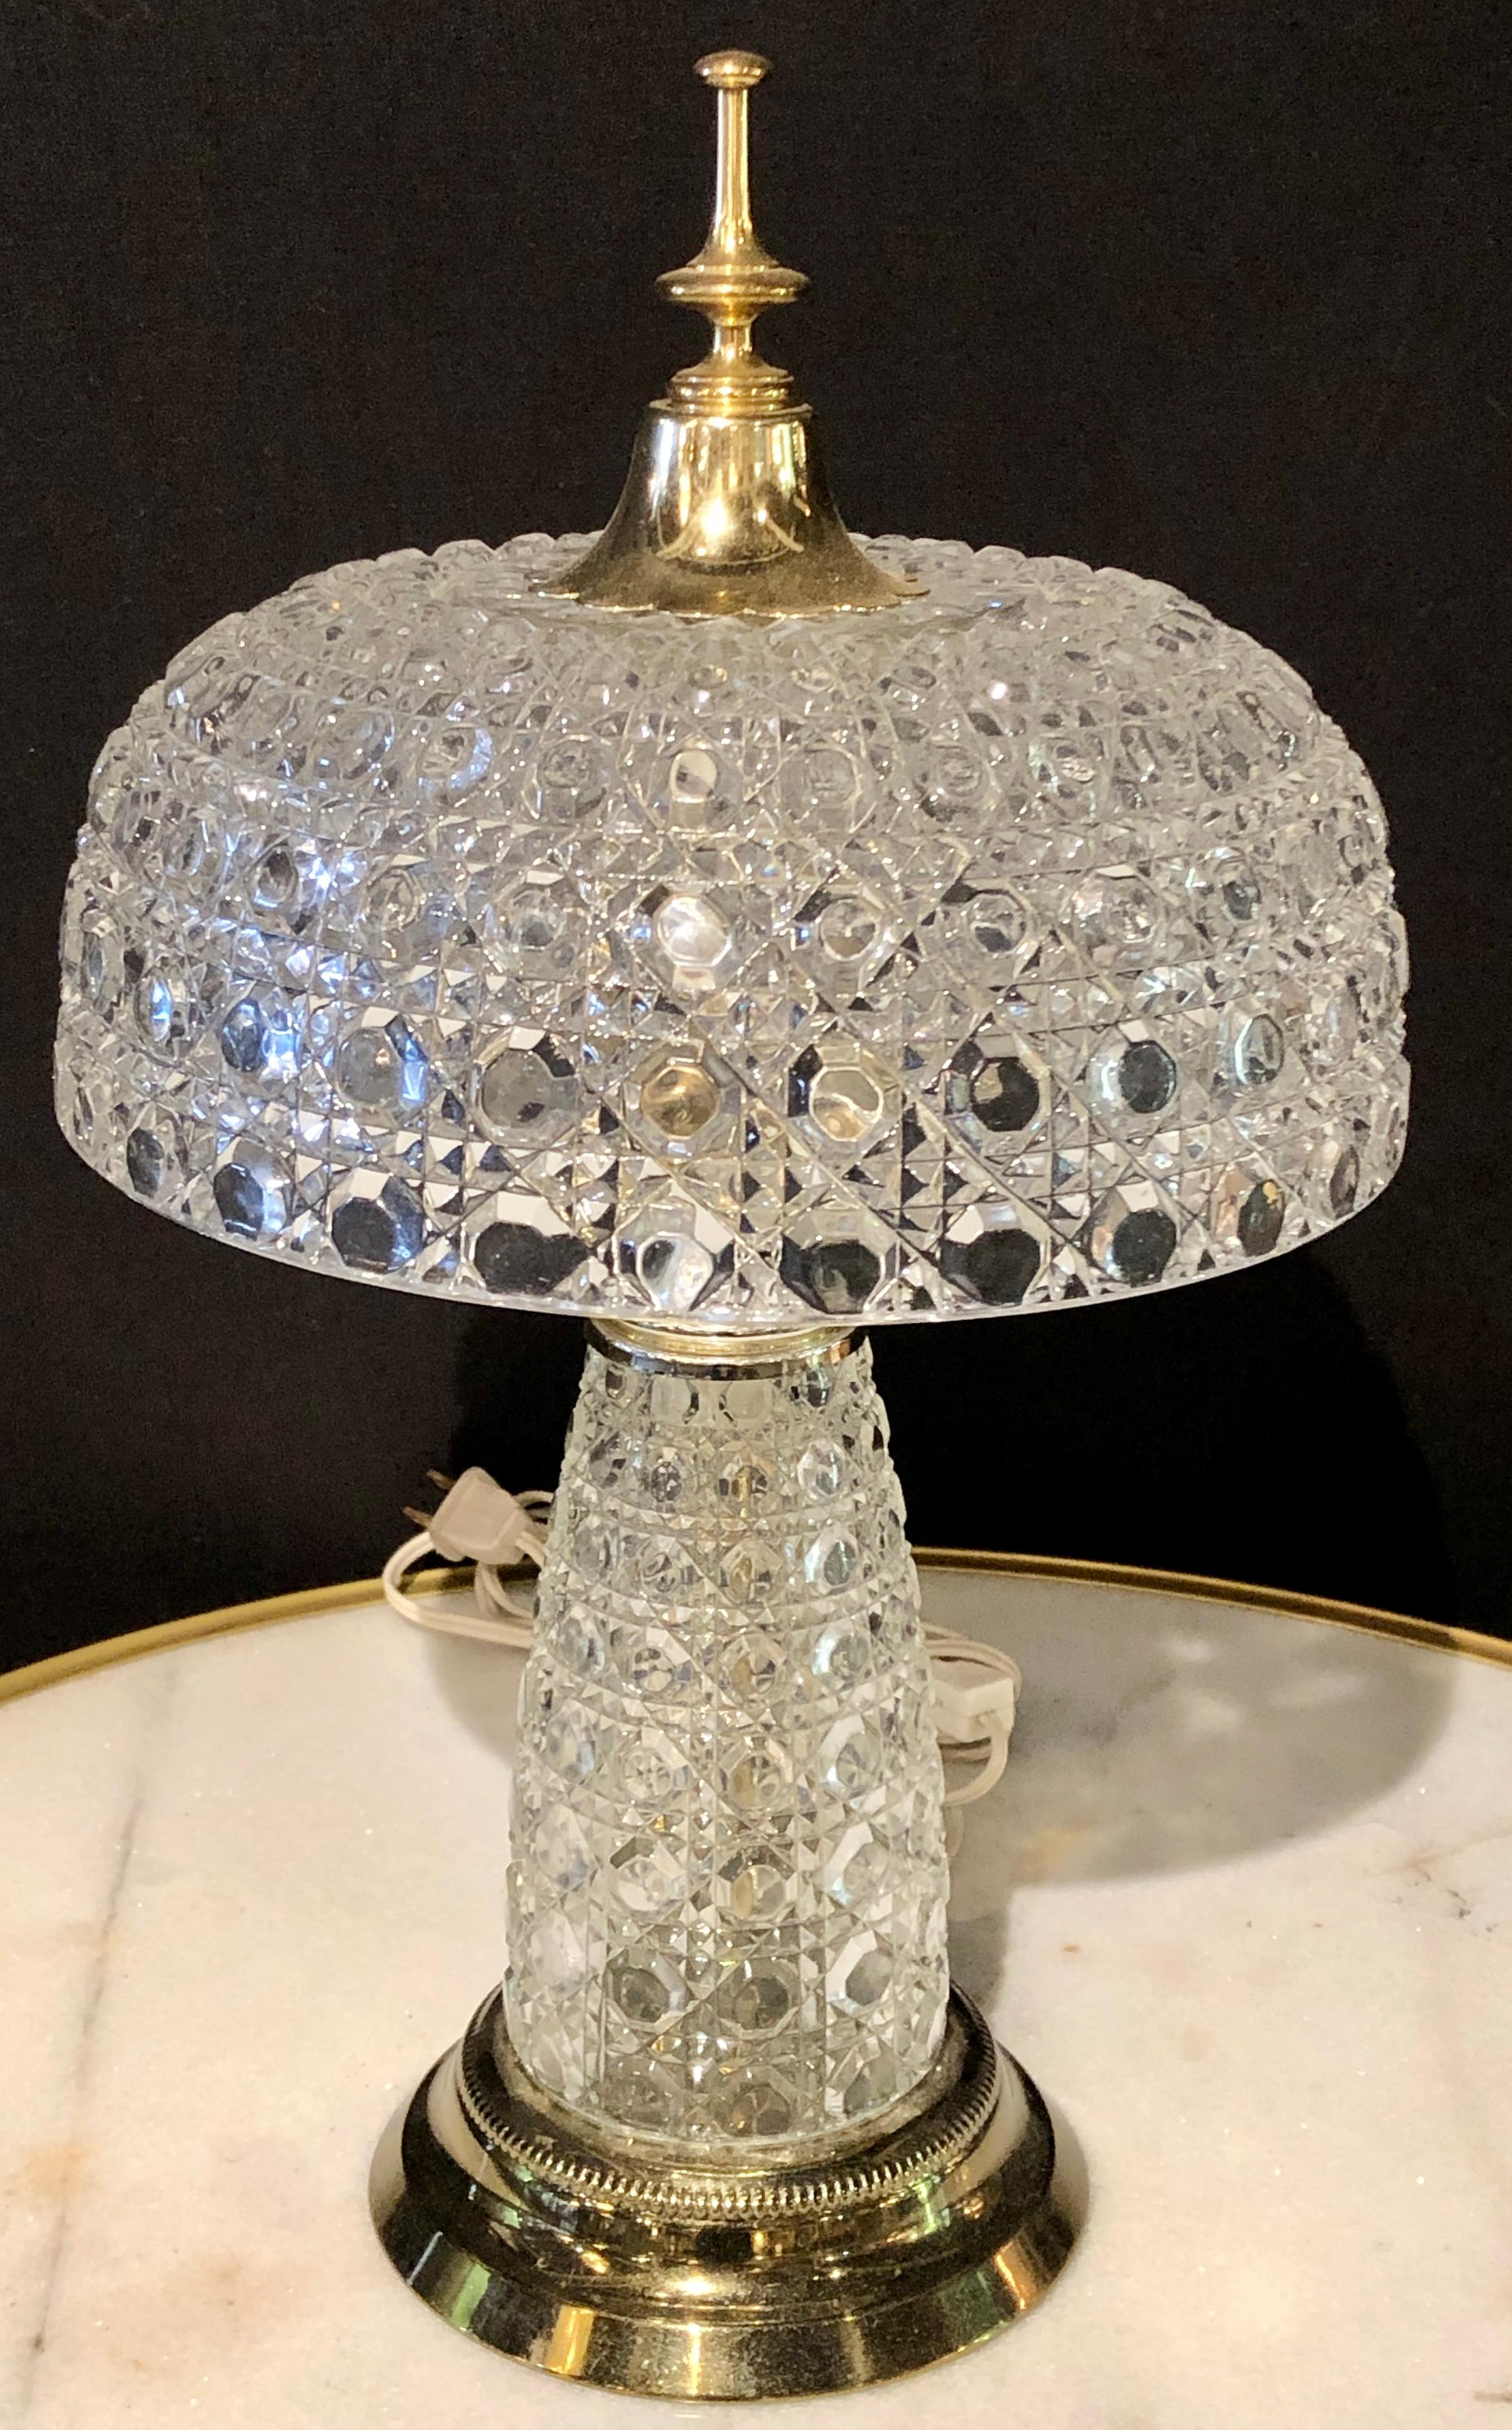 Art Deco style cut crystal dome shaped desk lamp. A very sweet decorative table or office lamp in a heavy cut crystal.
SX.